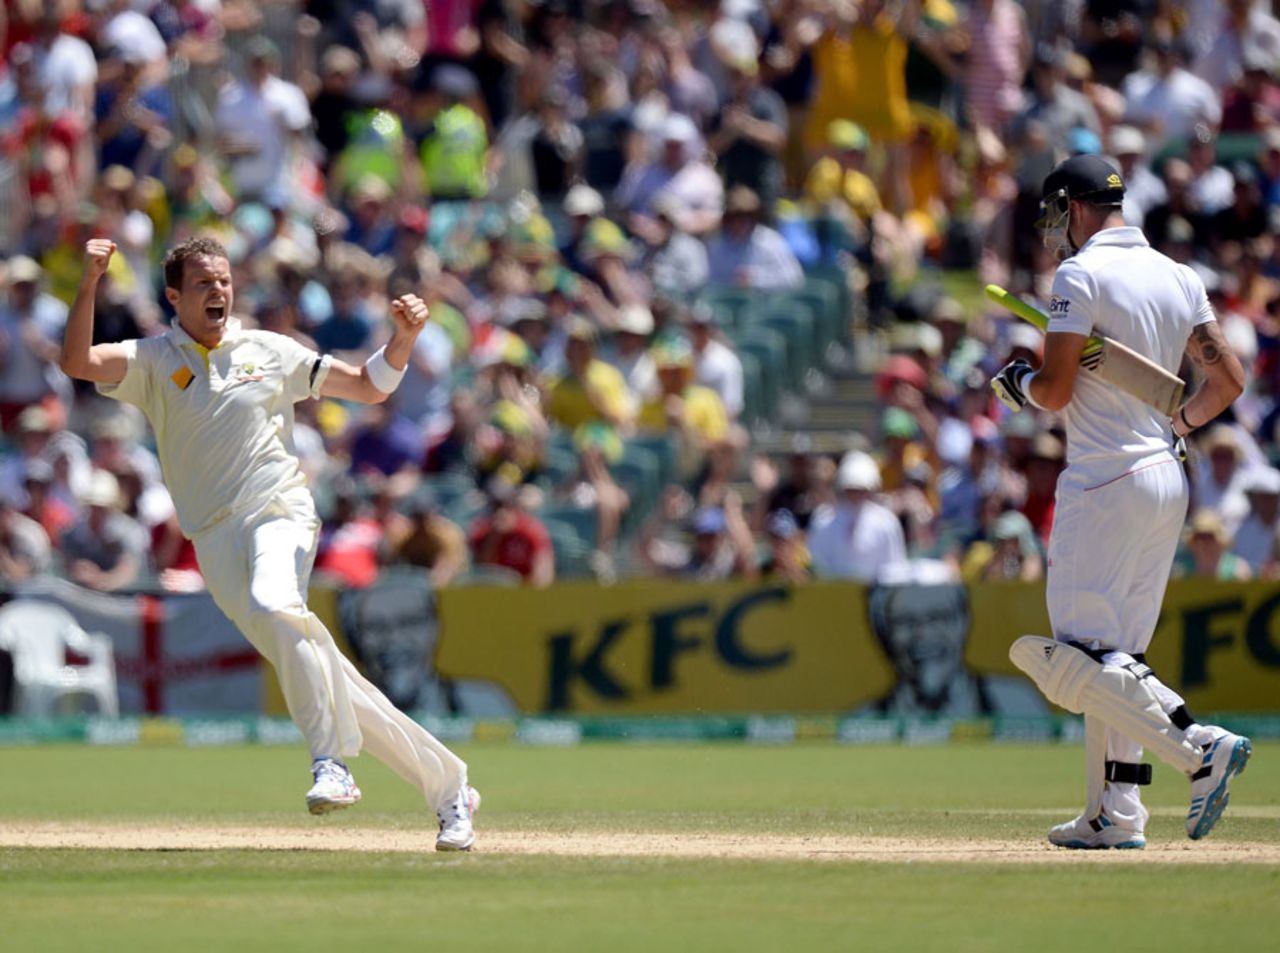 Peter Siddle picked up the prized wicket of Kevin Pietersen, Australia v England, 2nd Test, Adelaide, 3rd day, December 7, 2013